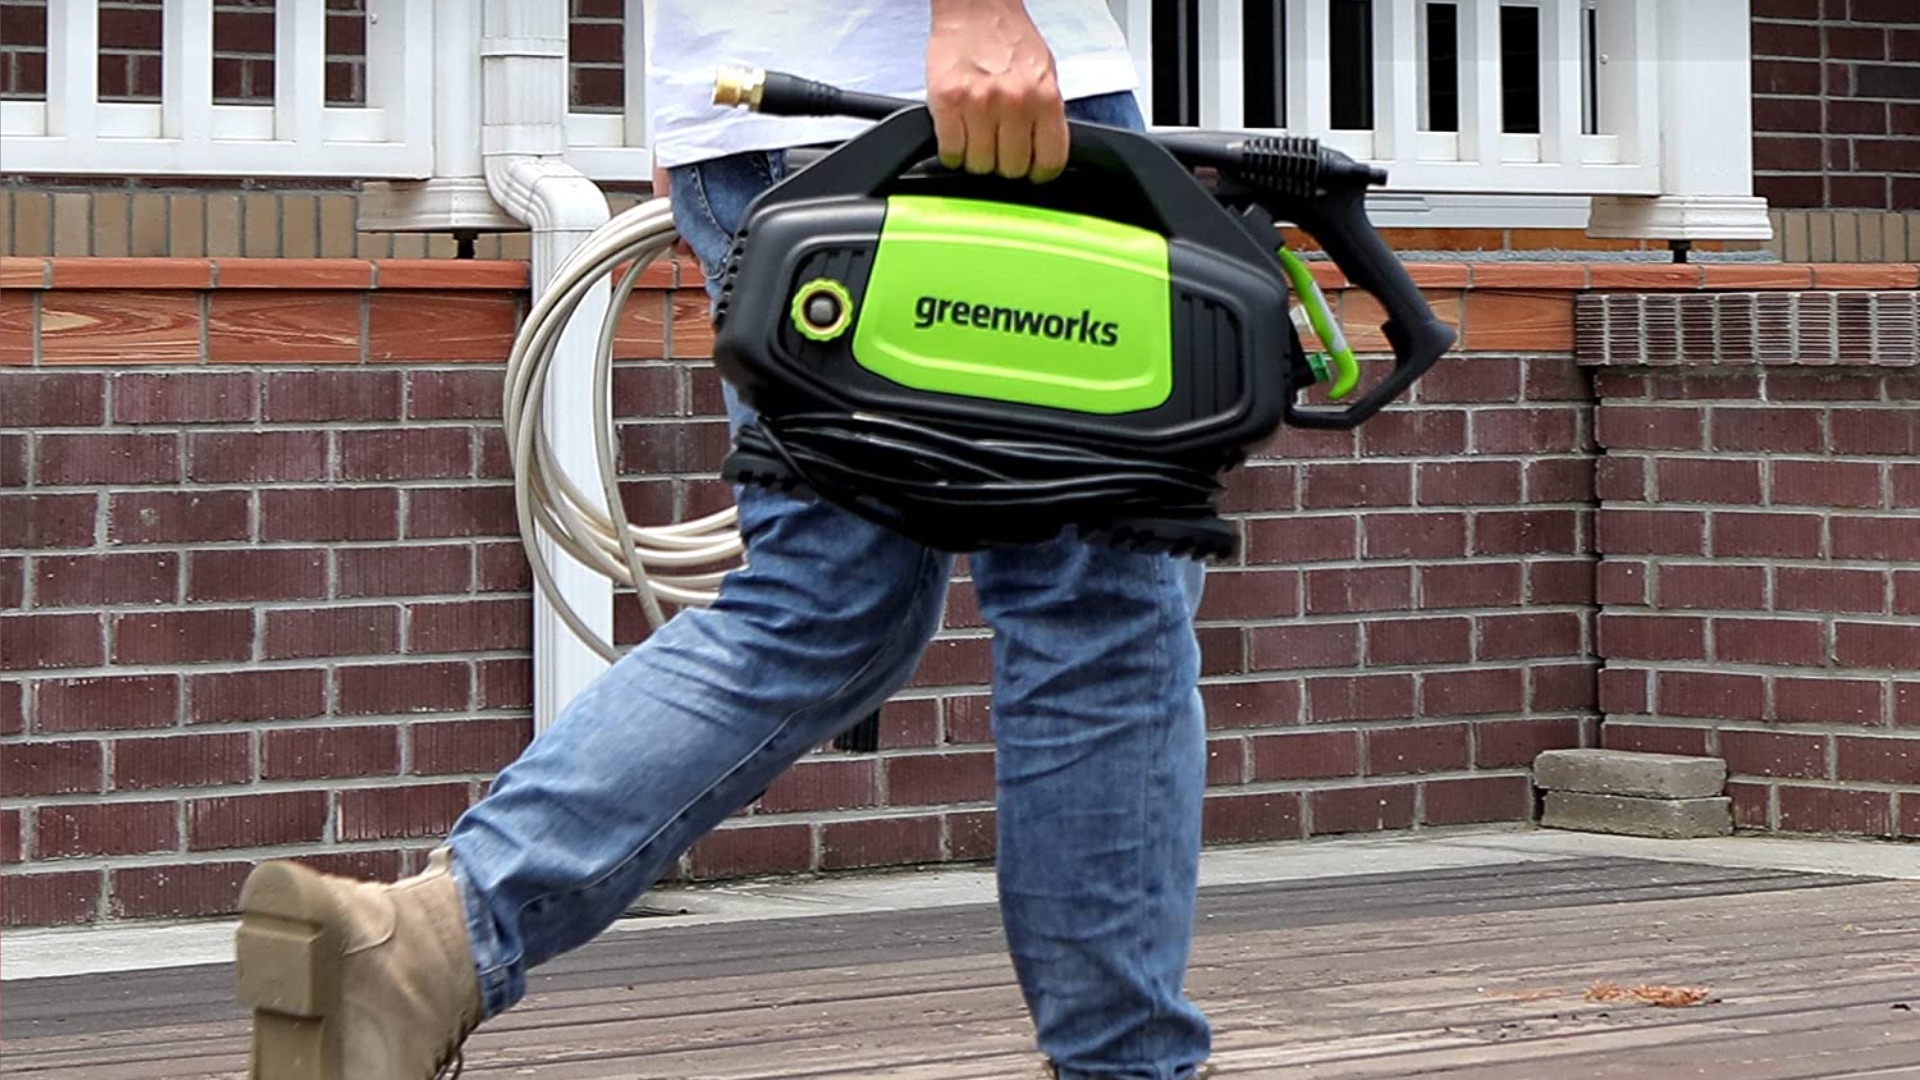 Greenworks electric pressure washer tackles tough messes at $70, more in New Green Deals